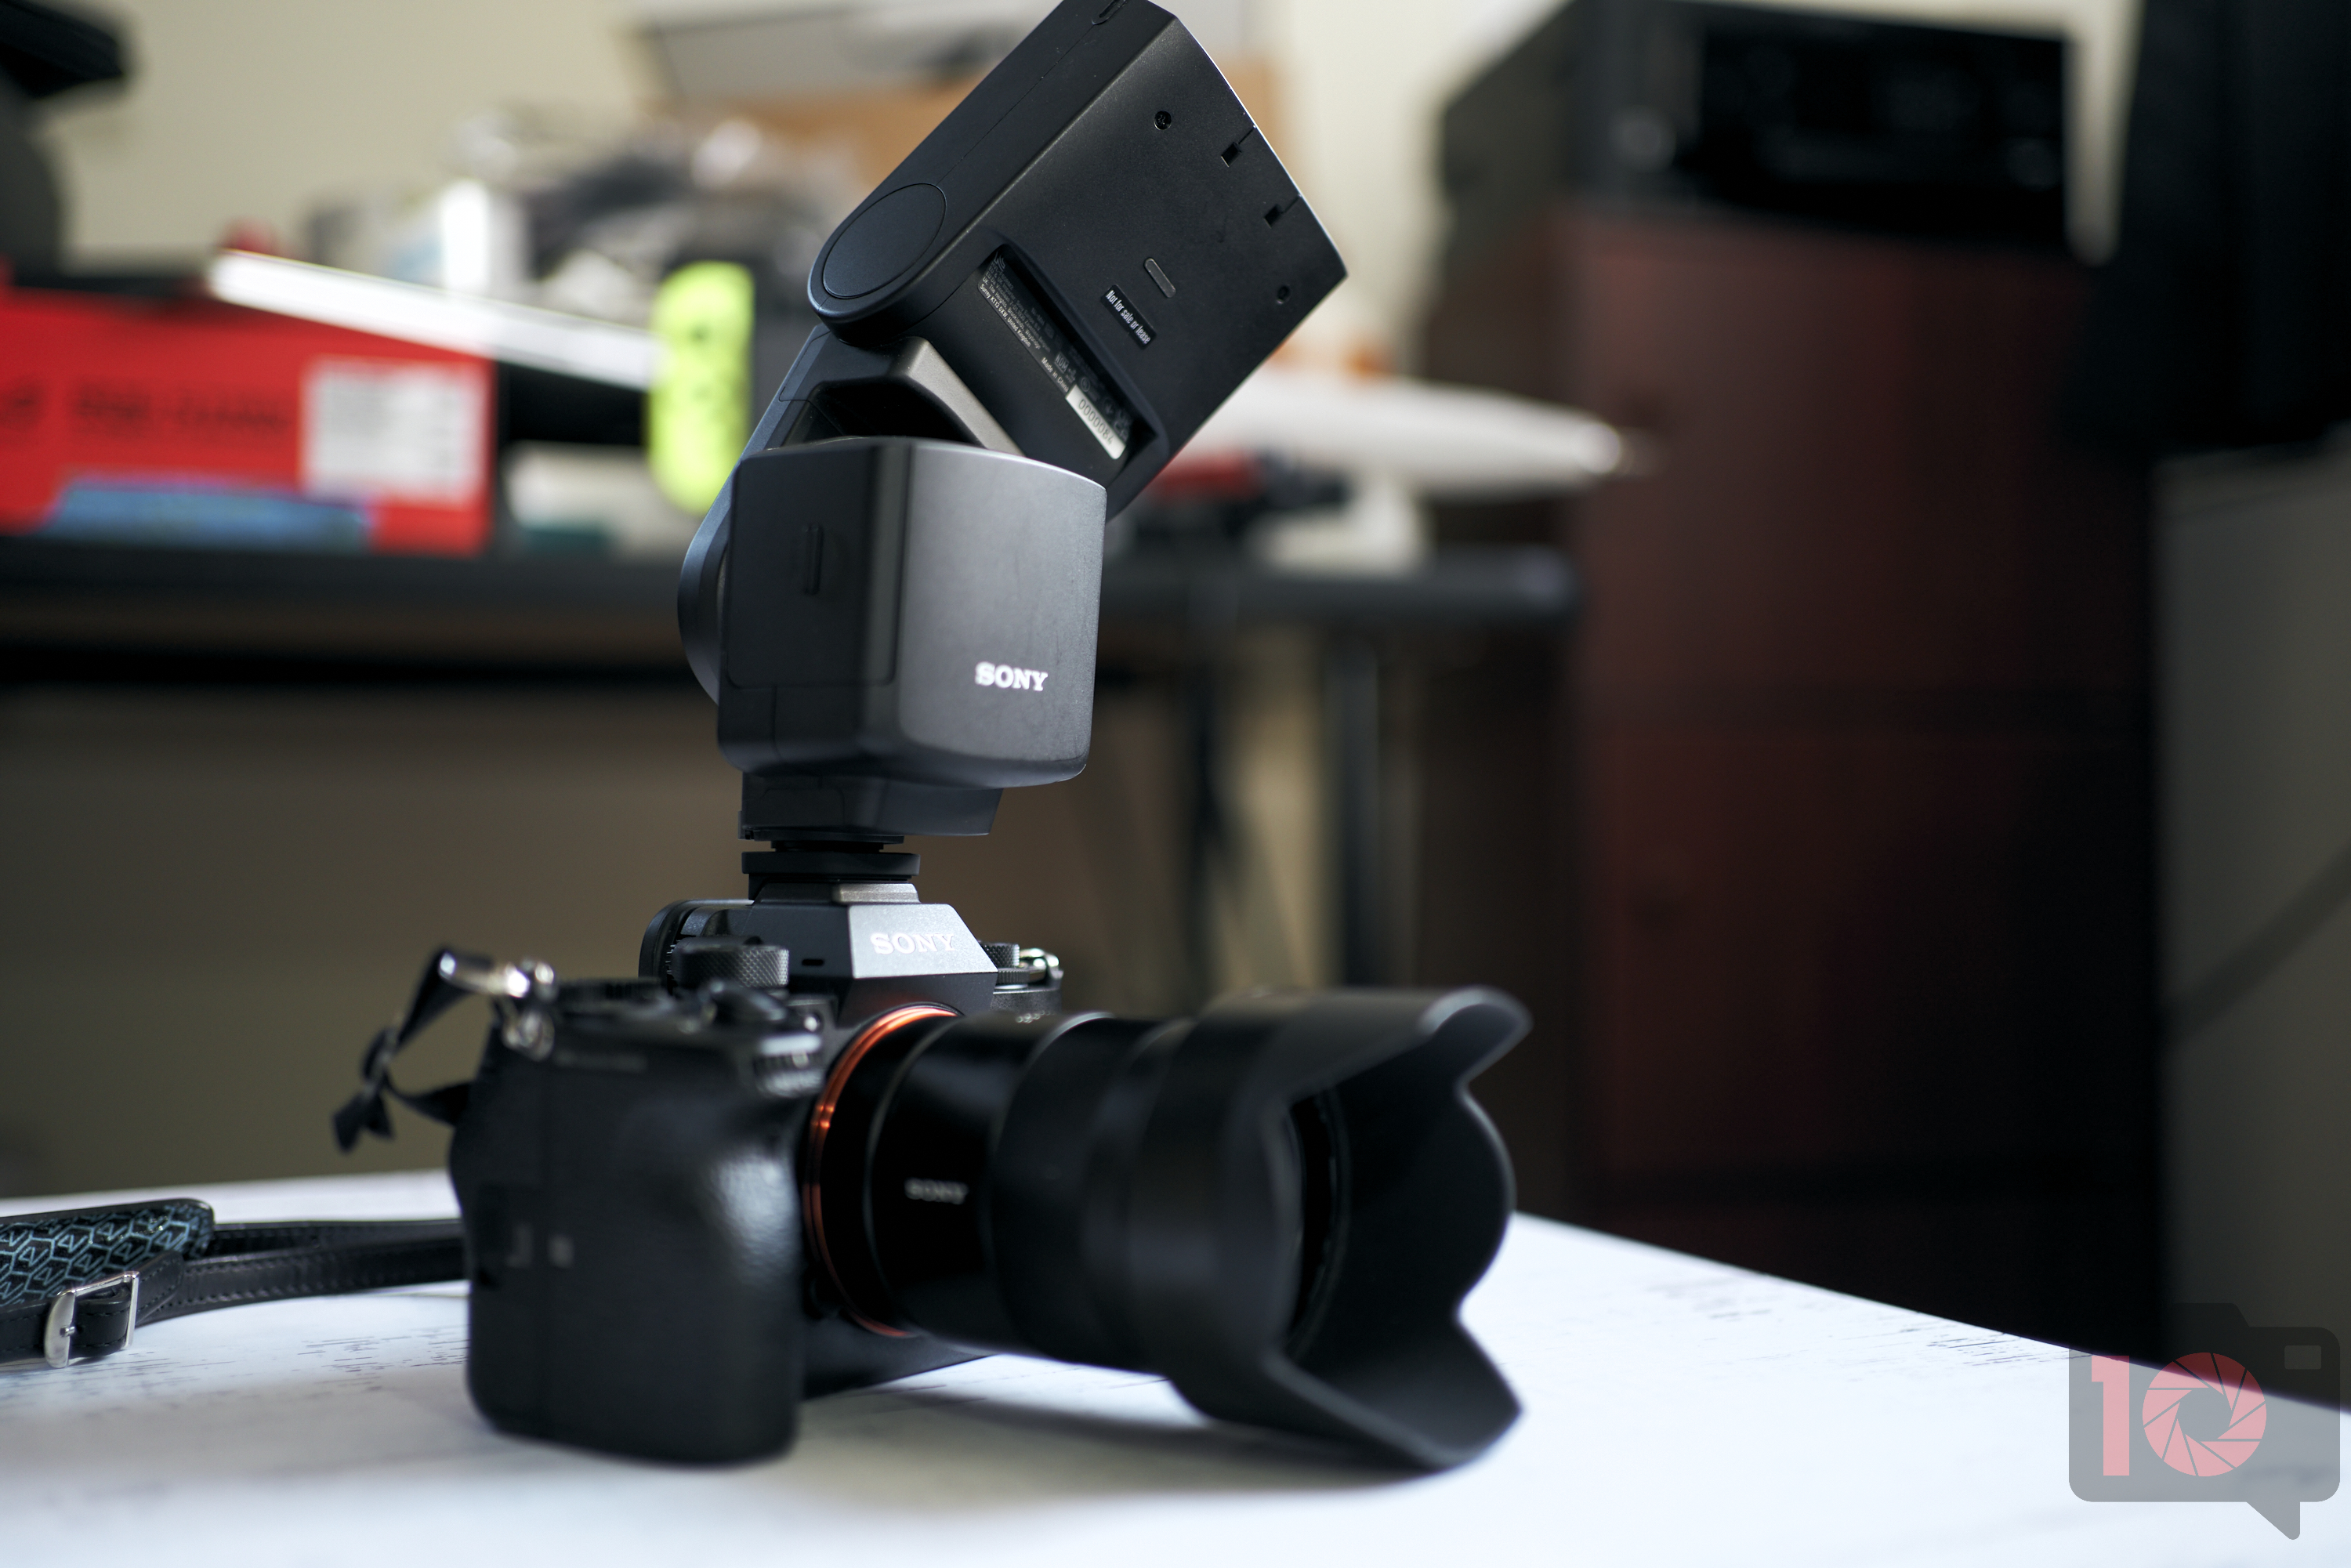 Using a Canon Speedlite Flash with a Sony A7R III